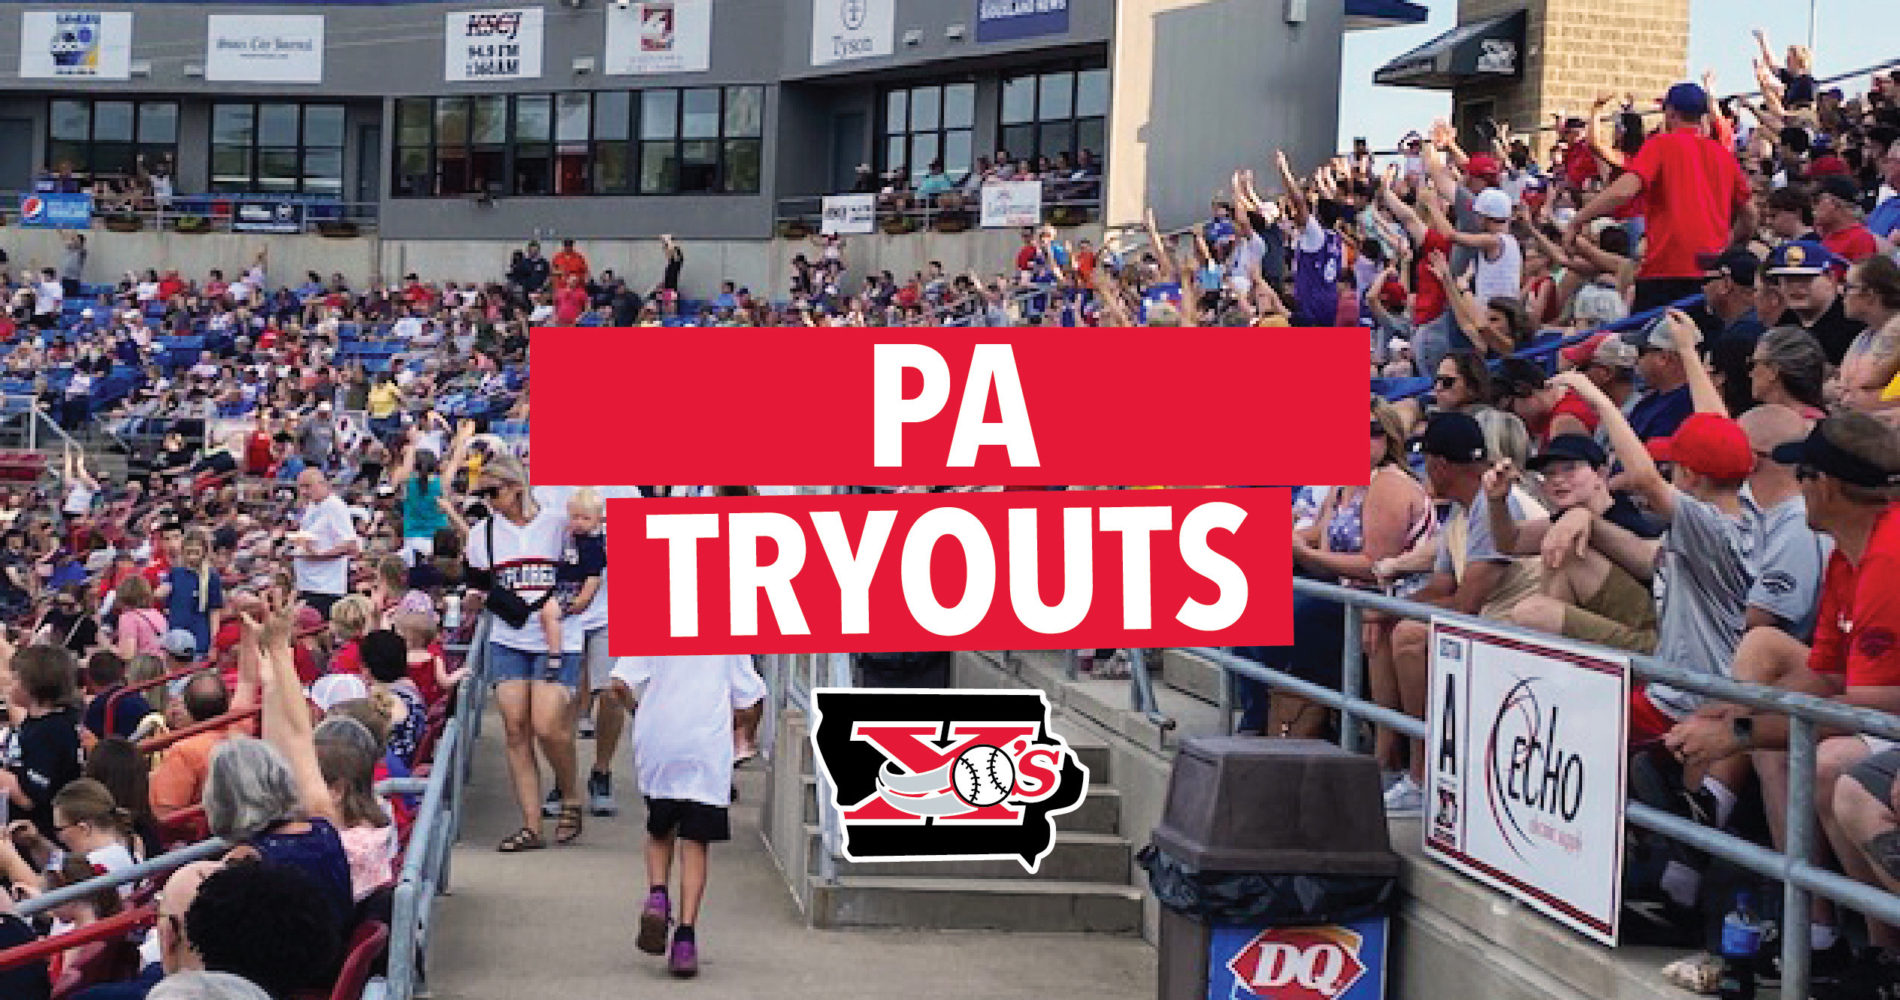 PA TRYOUTS ARE HERE